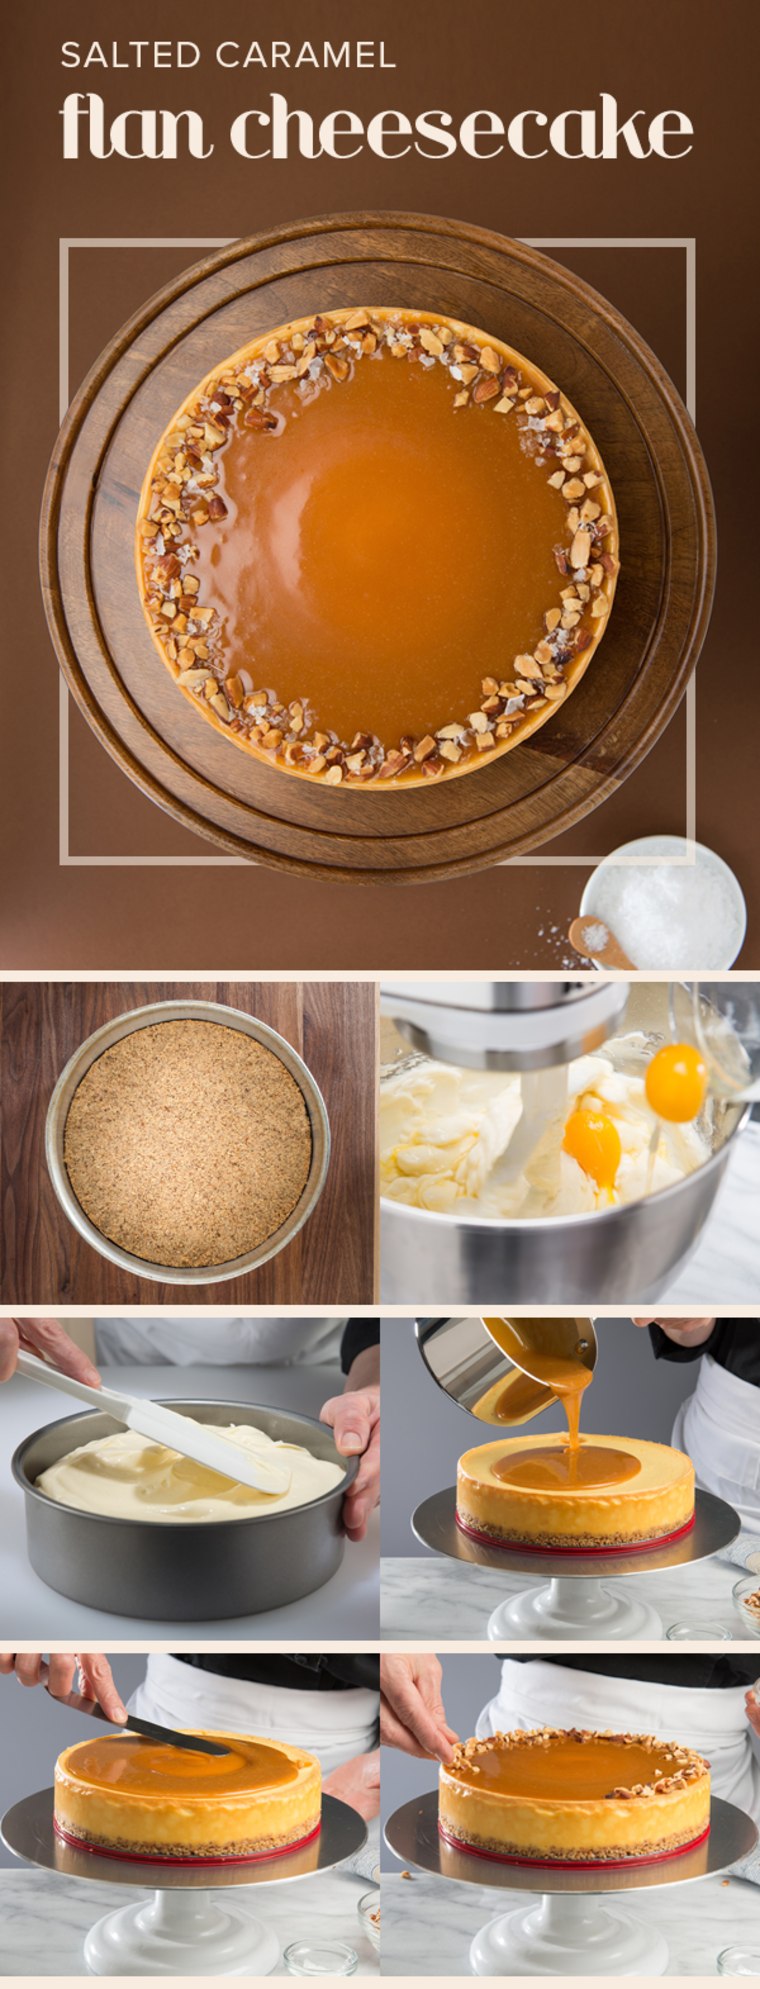 Pinterest TOPS for Salted Caramel Flan Cheesecake; recipe courtesy of Eli's Cheesecake